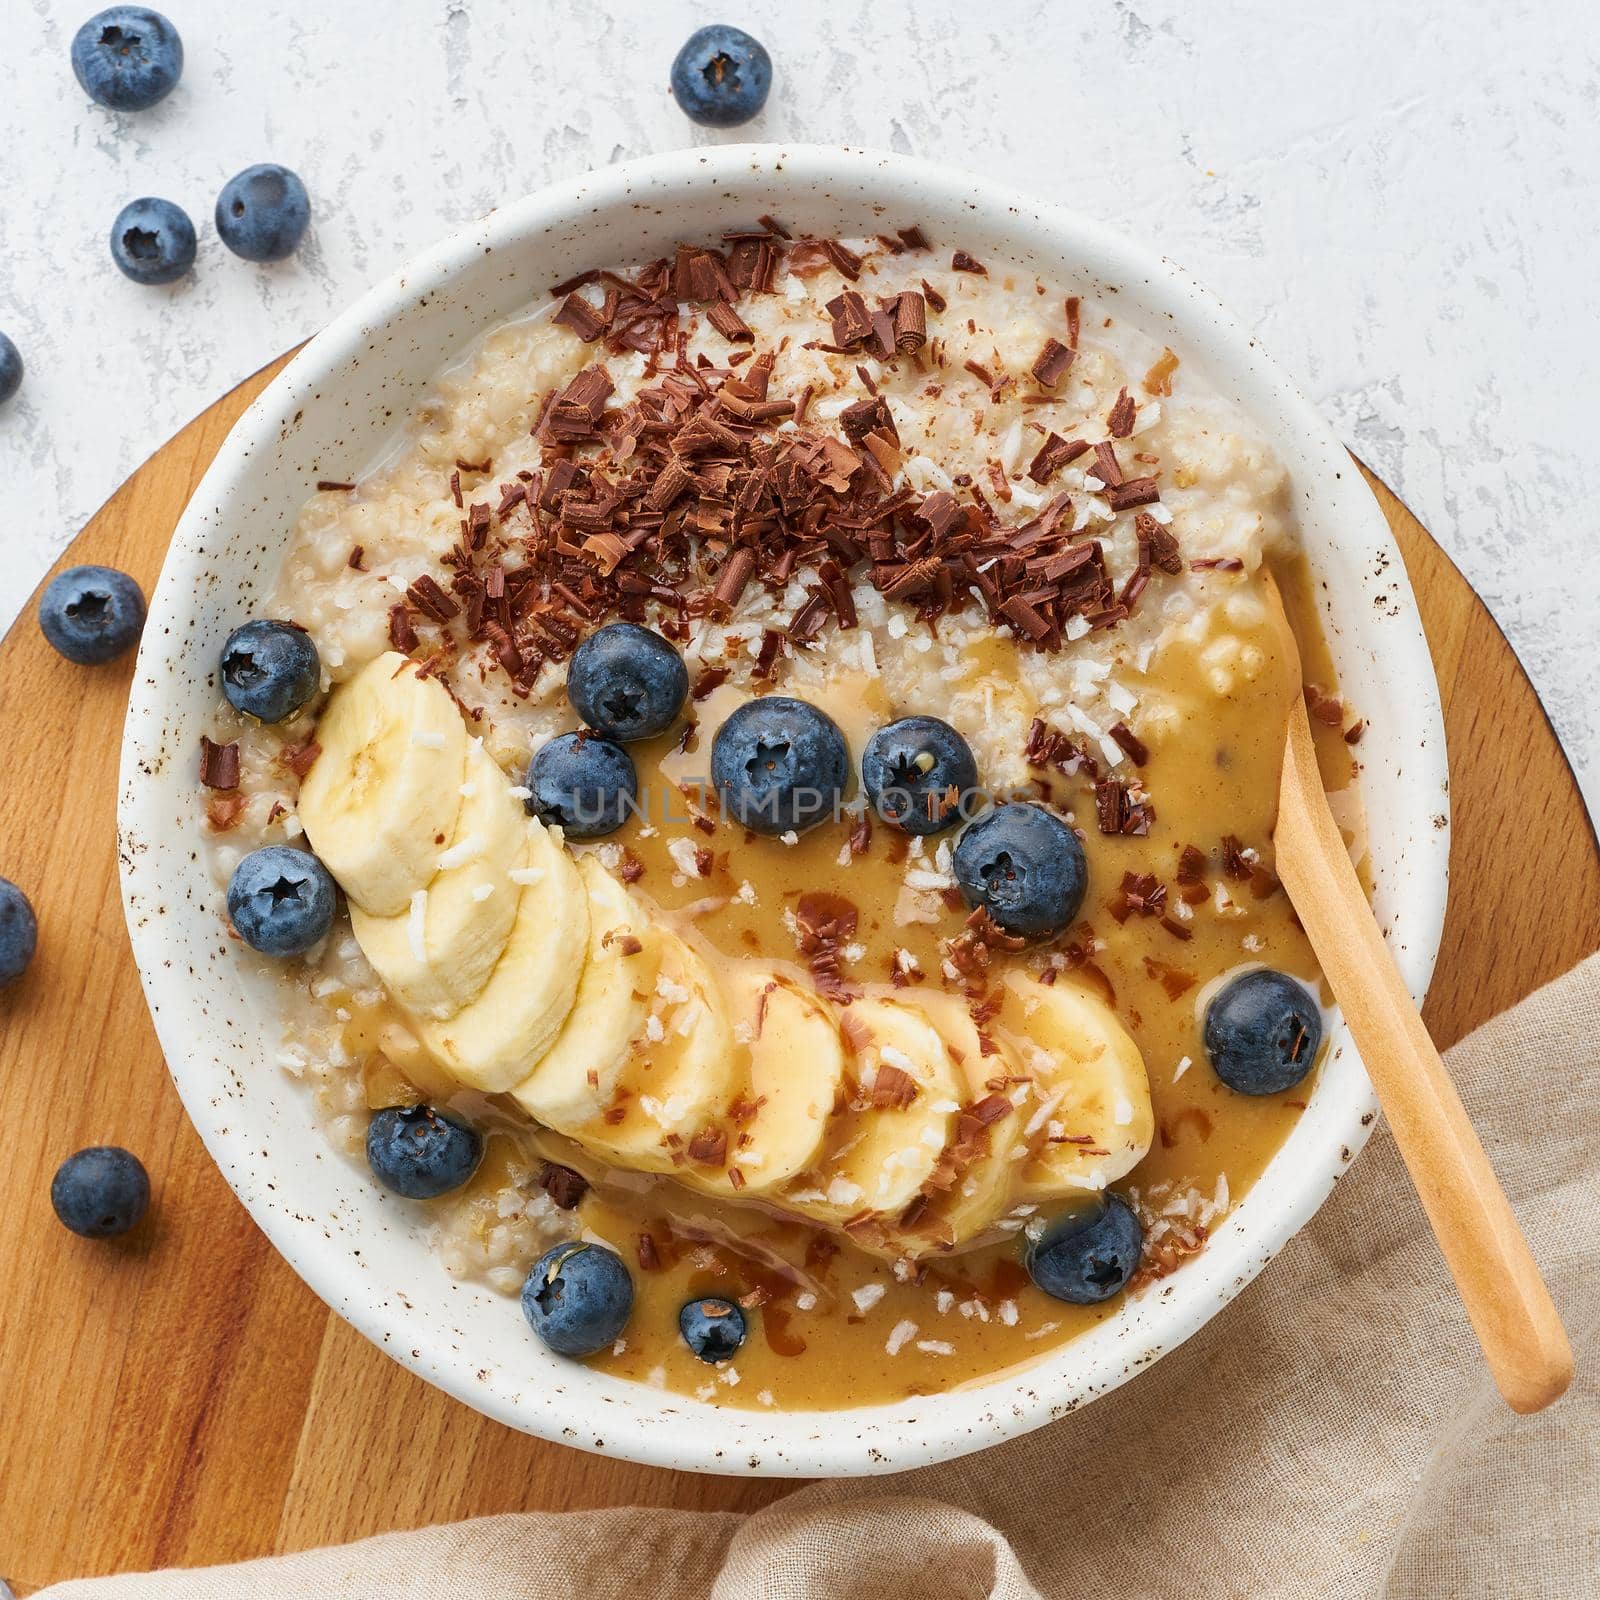 Oatmeal rustic porridge with blueberry, bilberry, blackberry, banana, chocolate and nut honey pasta, dash diet, wooden white background top view